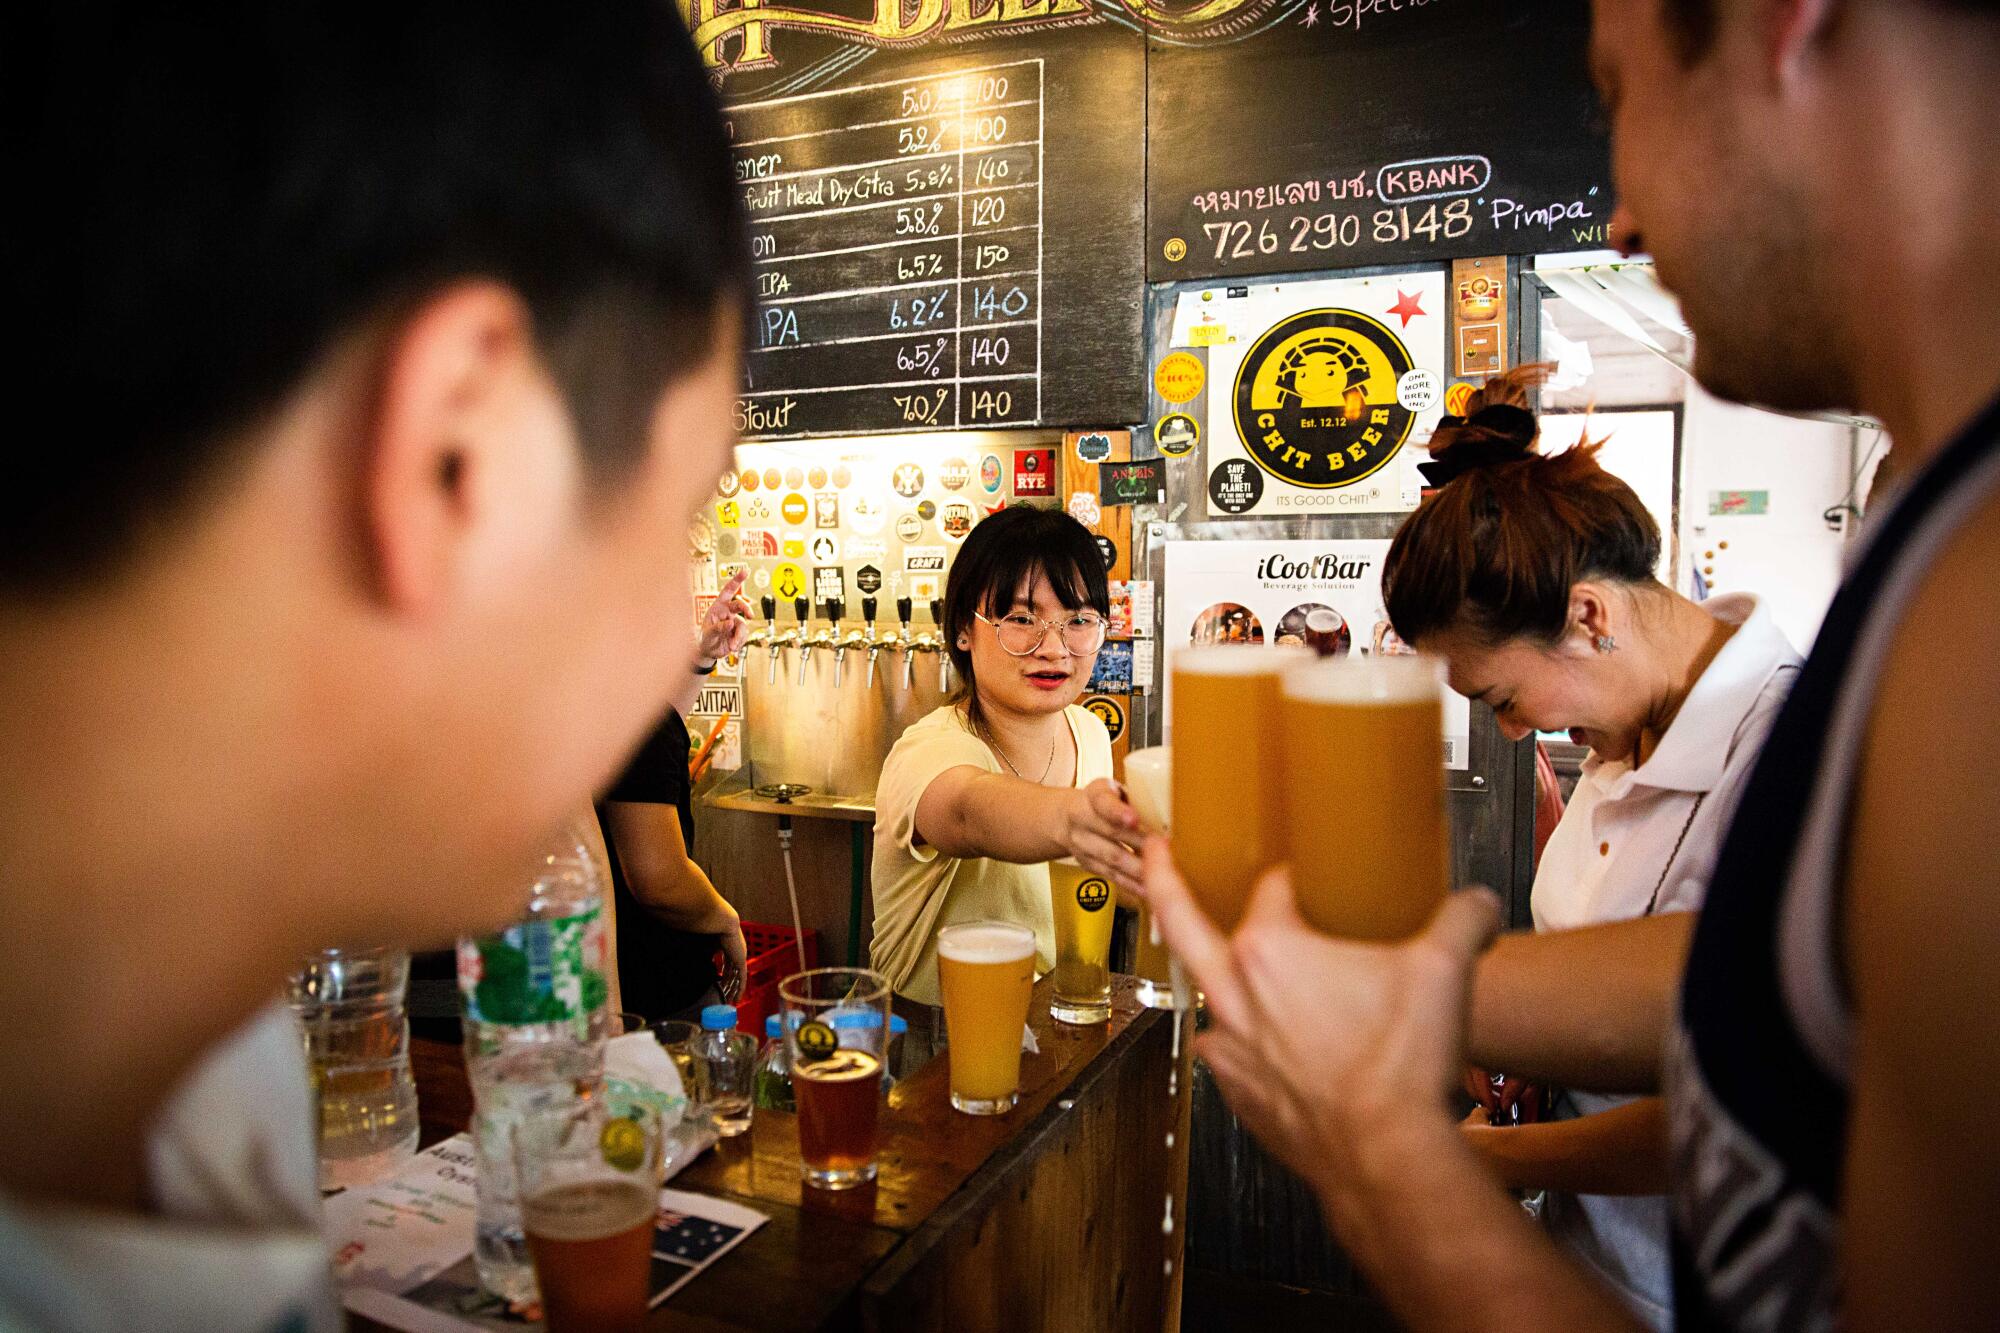 A bartender serves patrons at Chit Beer in Thailand